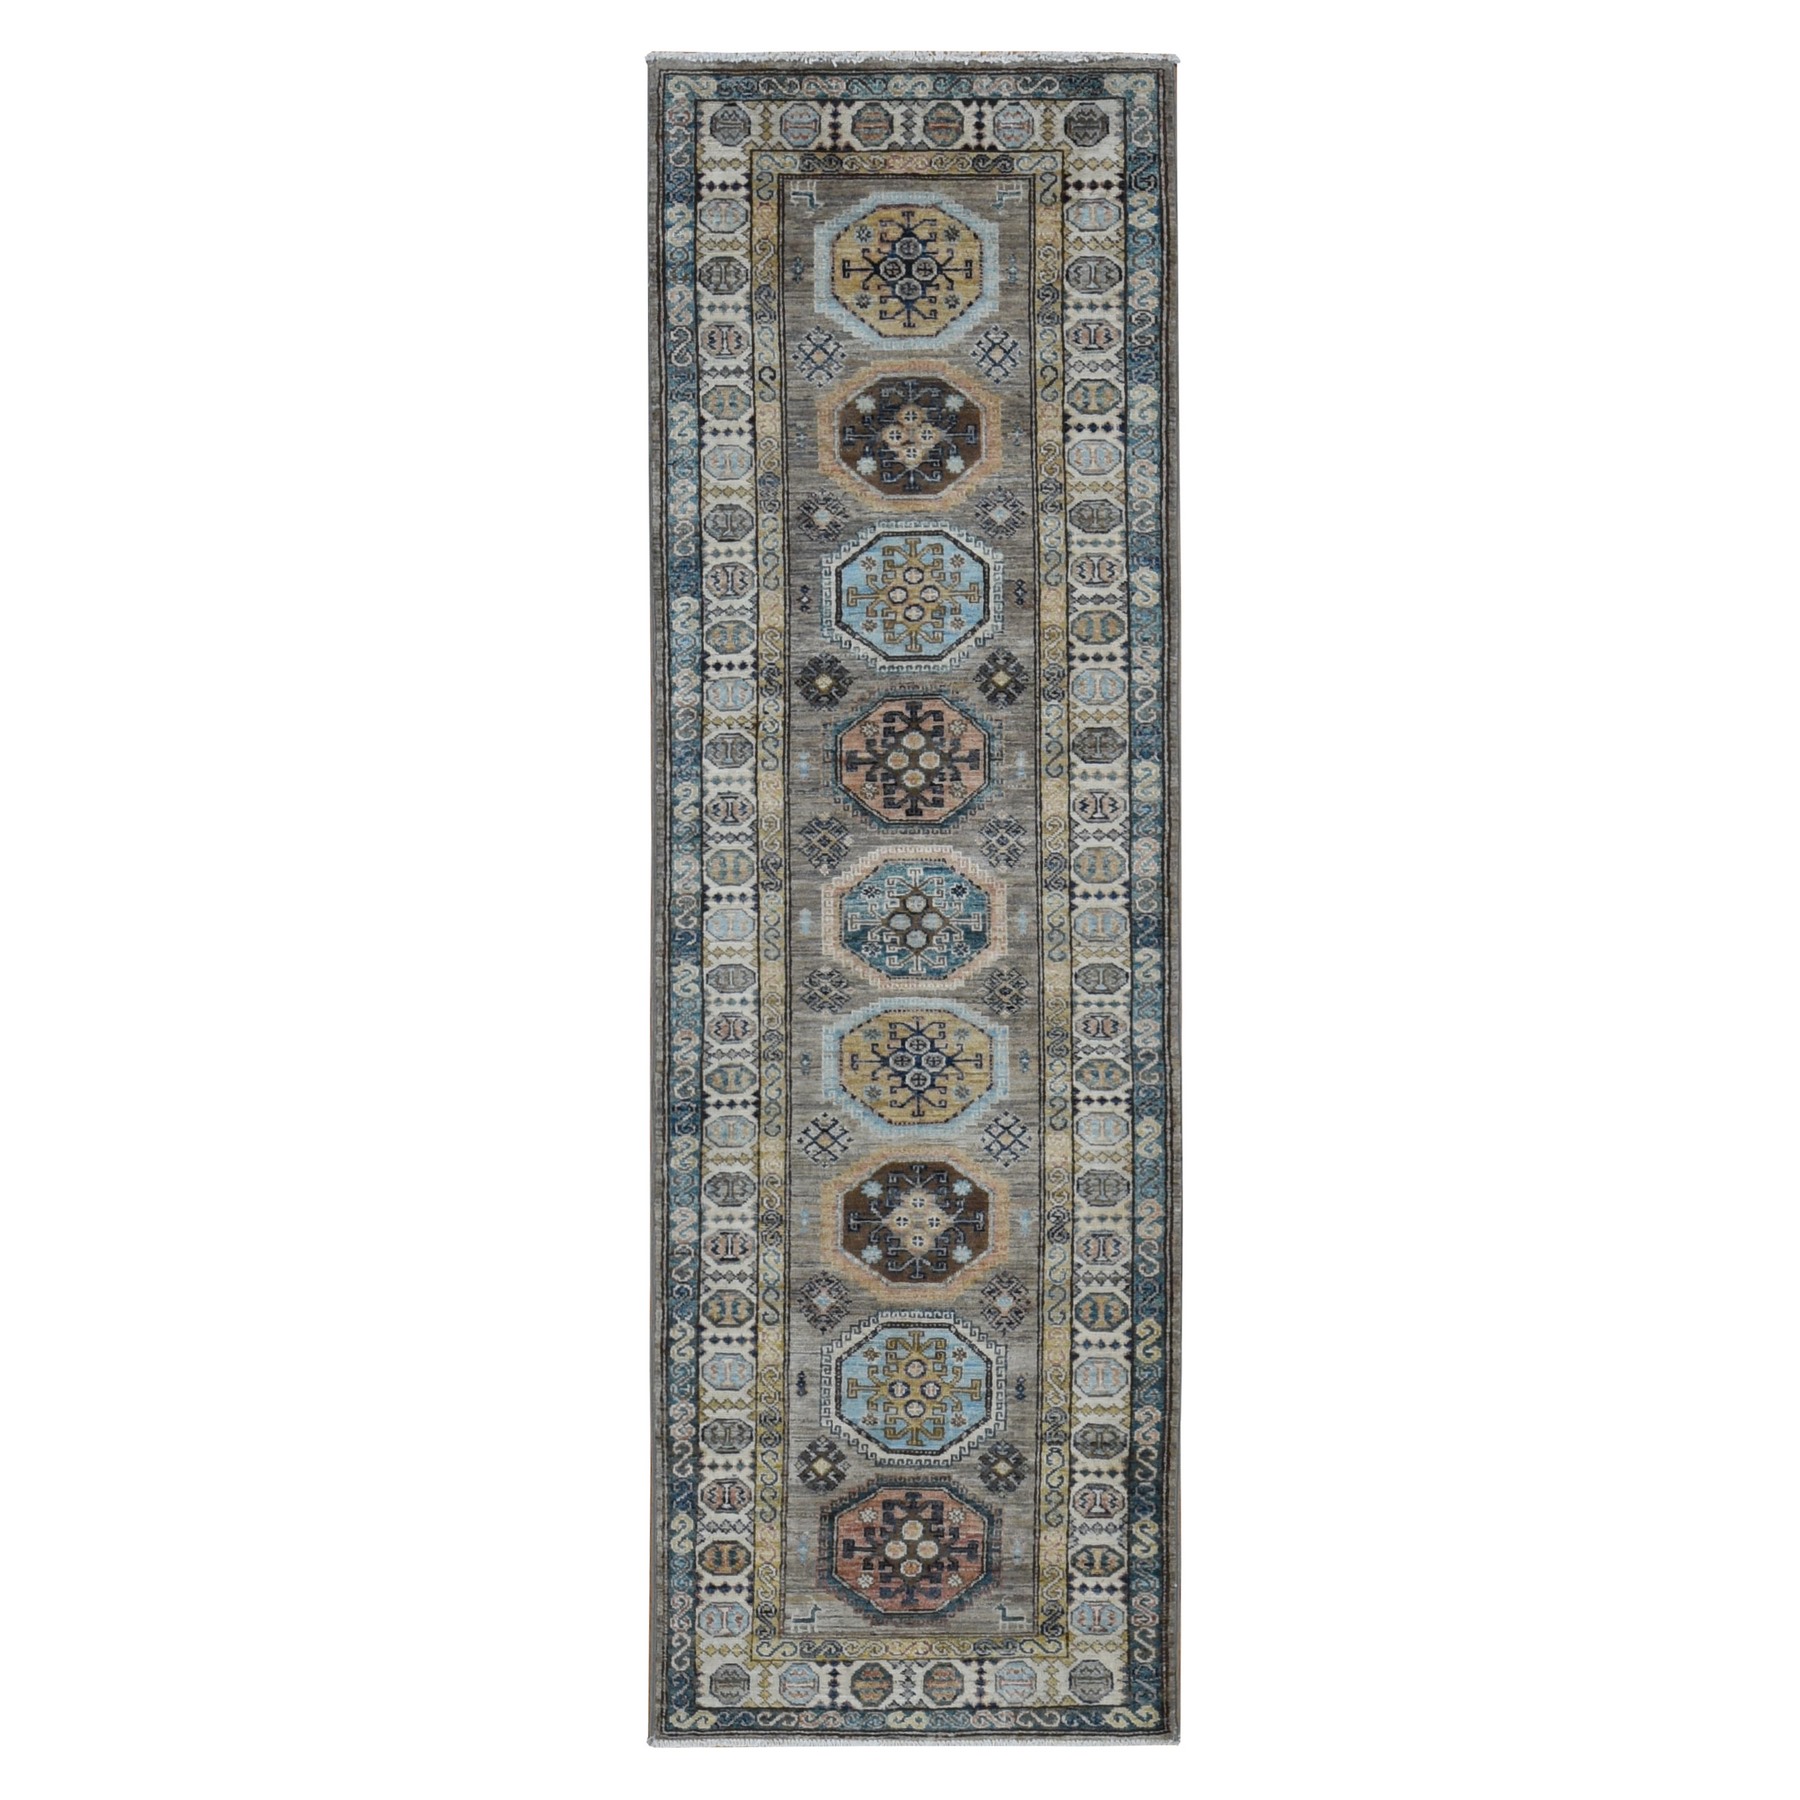 2'8"x8'2" Fossil Gray, Afghan Super Kazak with Tribal Motif, Multiple Border, Hand Woven, Pure Wool, Runner, Oriental Rug 